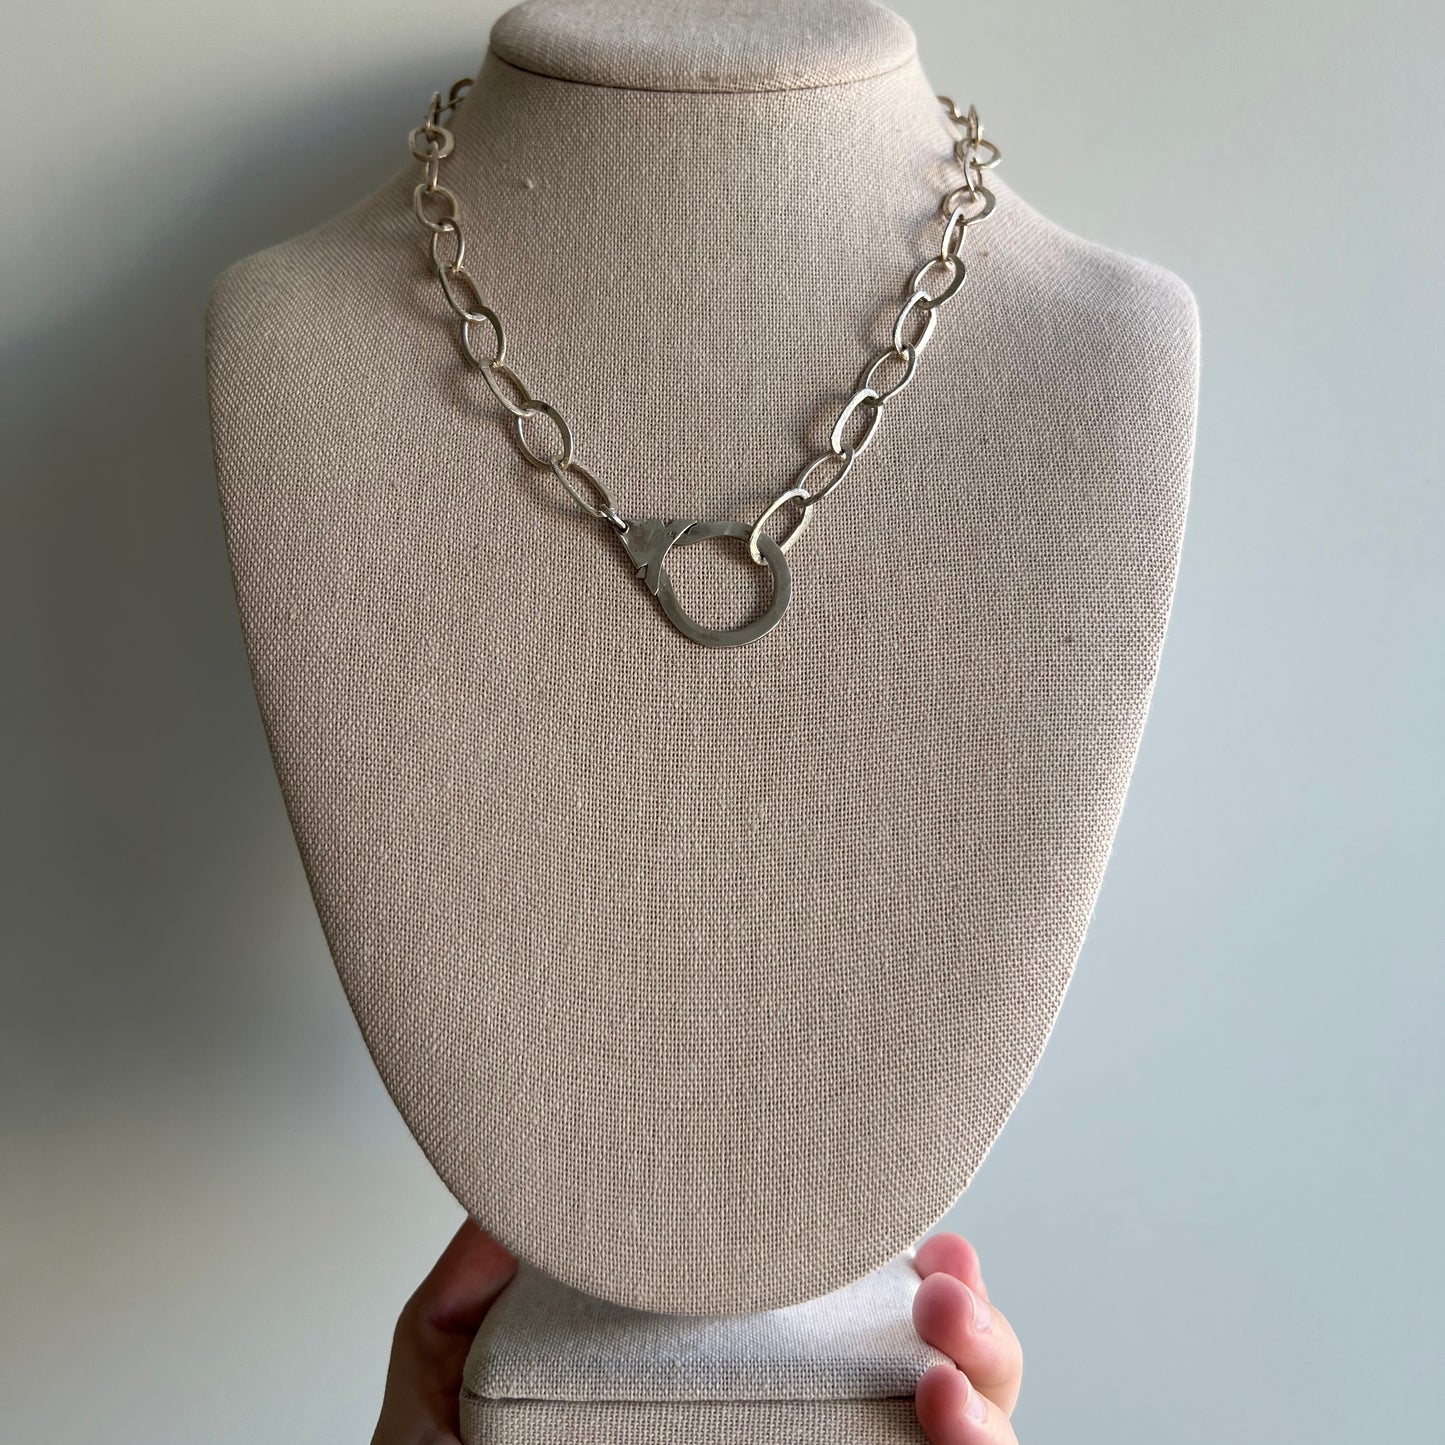 reimagined V I N T A G E // all linked up / sterling silver hammered brushed oval link chain with a connector clasp / 17"